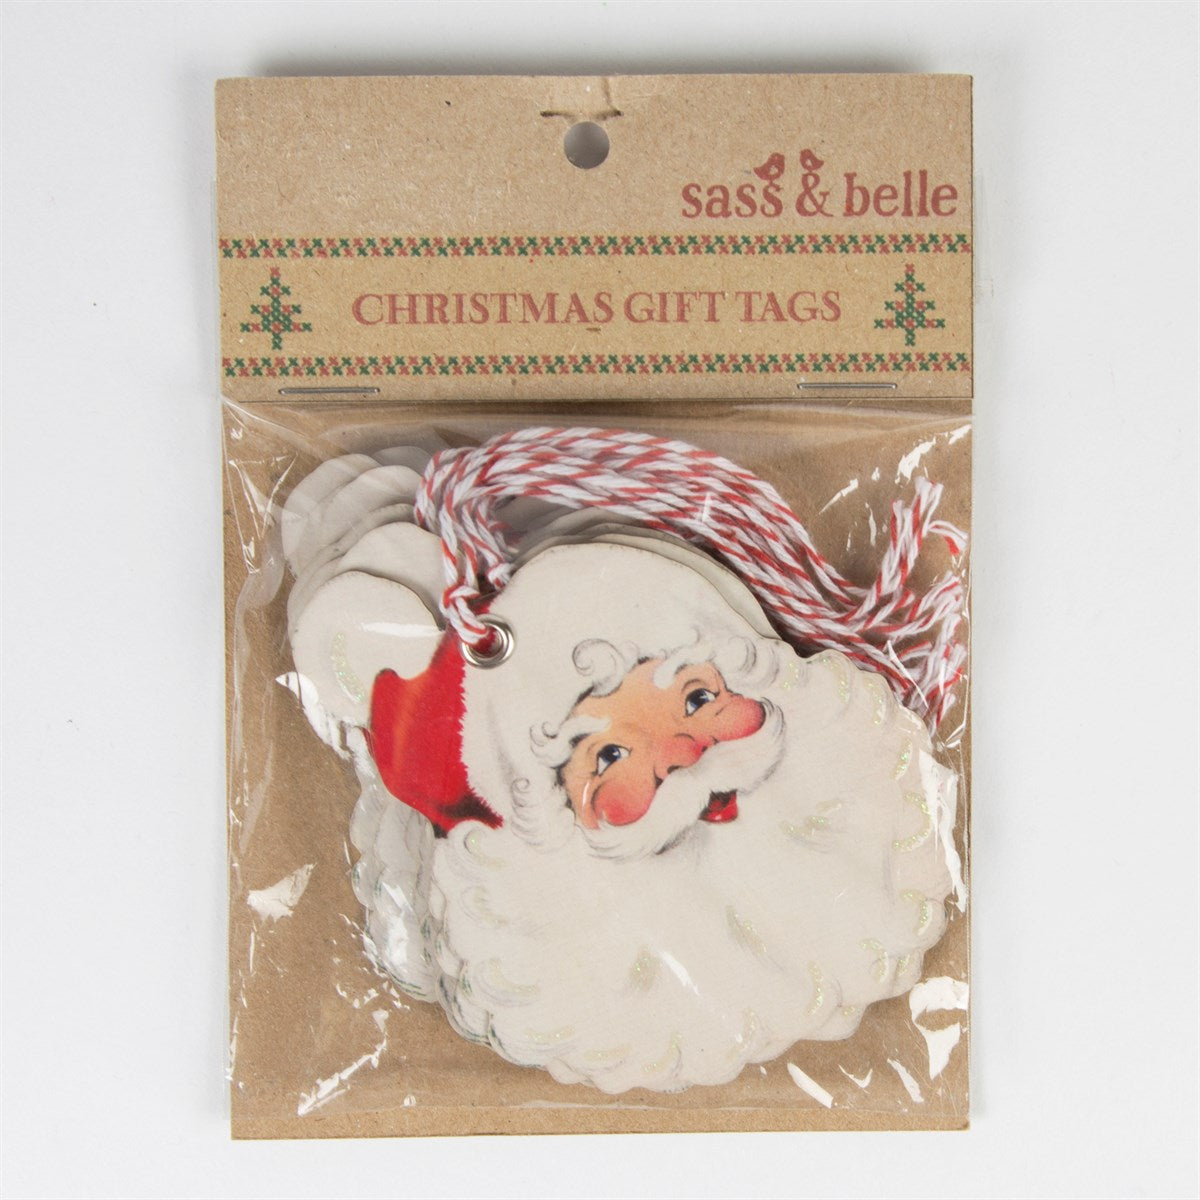 Father Christmas' Face Gift Tags